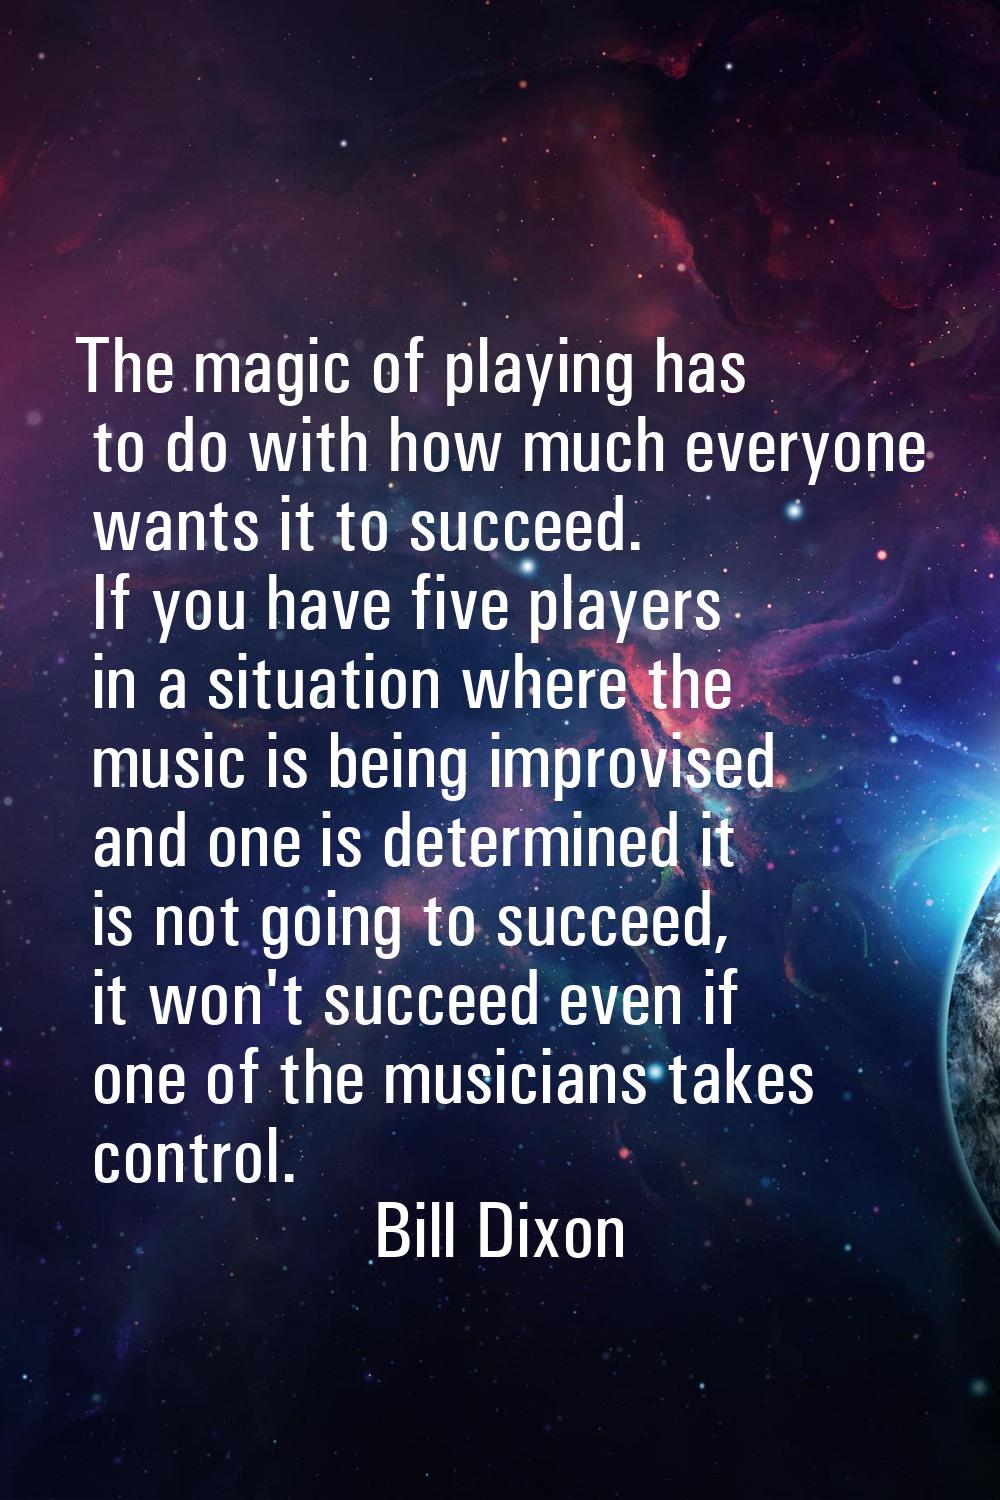 The magic of playing has to do with how much everyone wants it to succeed. If you have five players